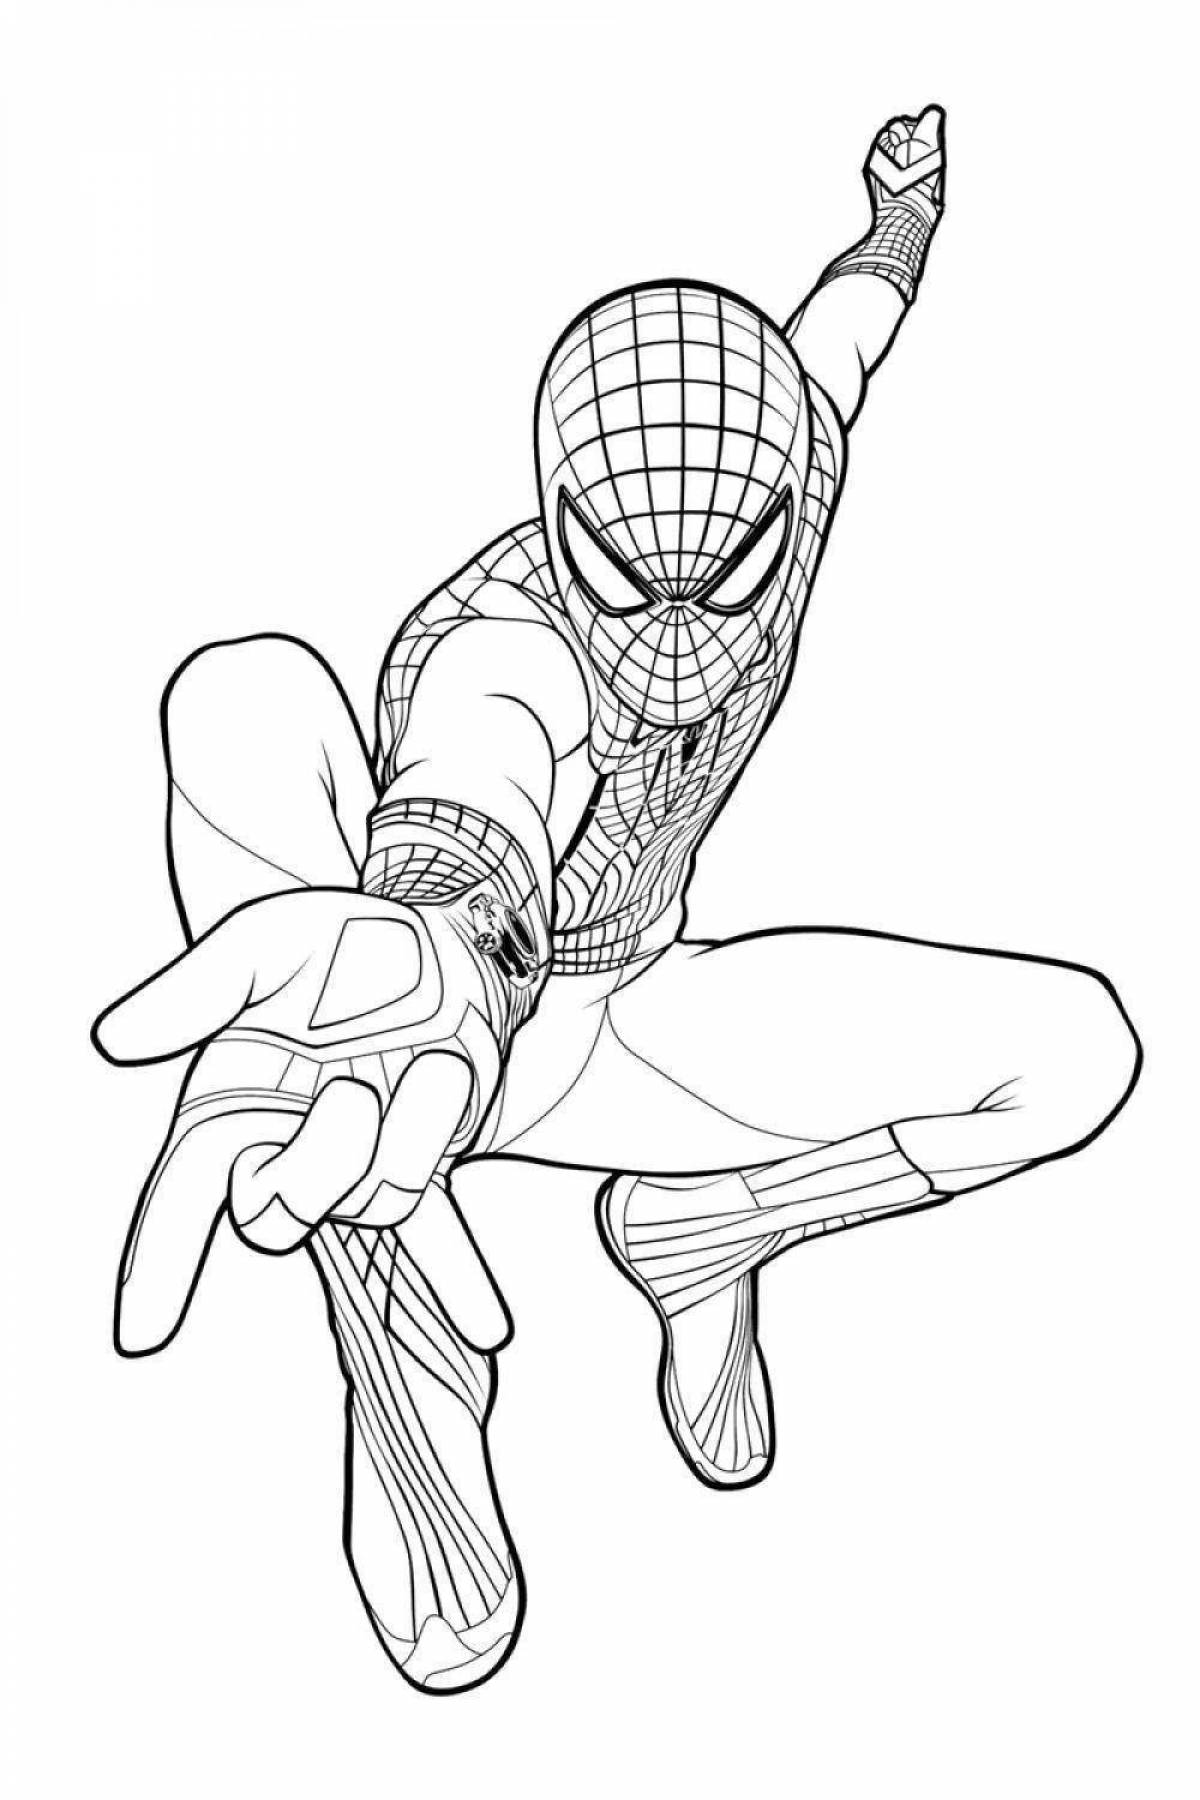 Marvelous Spider-Man with Shield coloring book